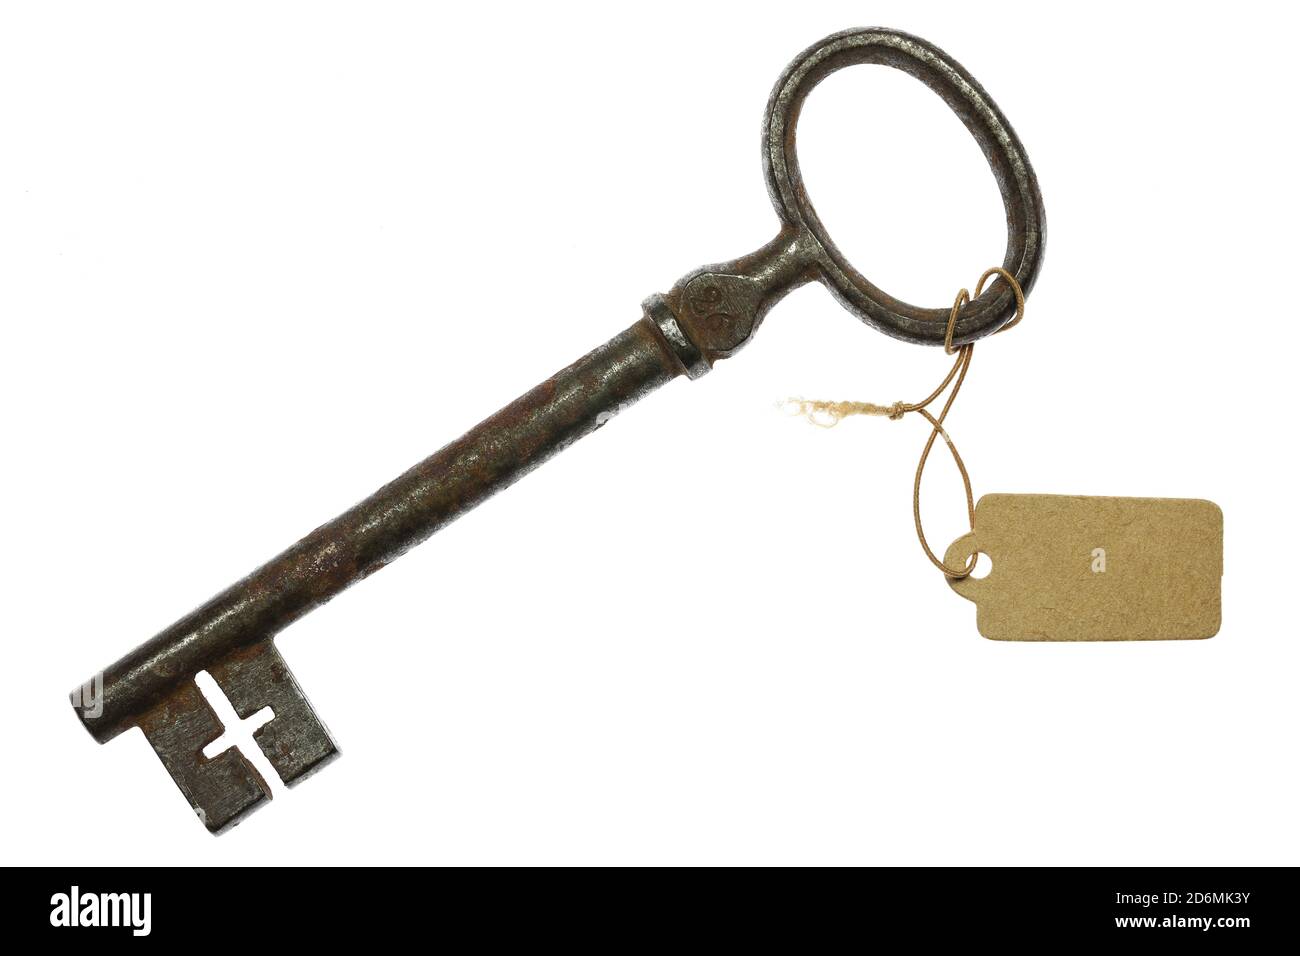 antique key with tag isolated on white background Stock Photo